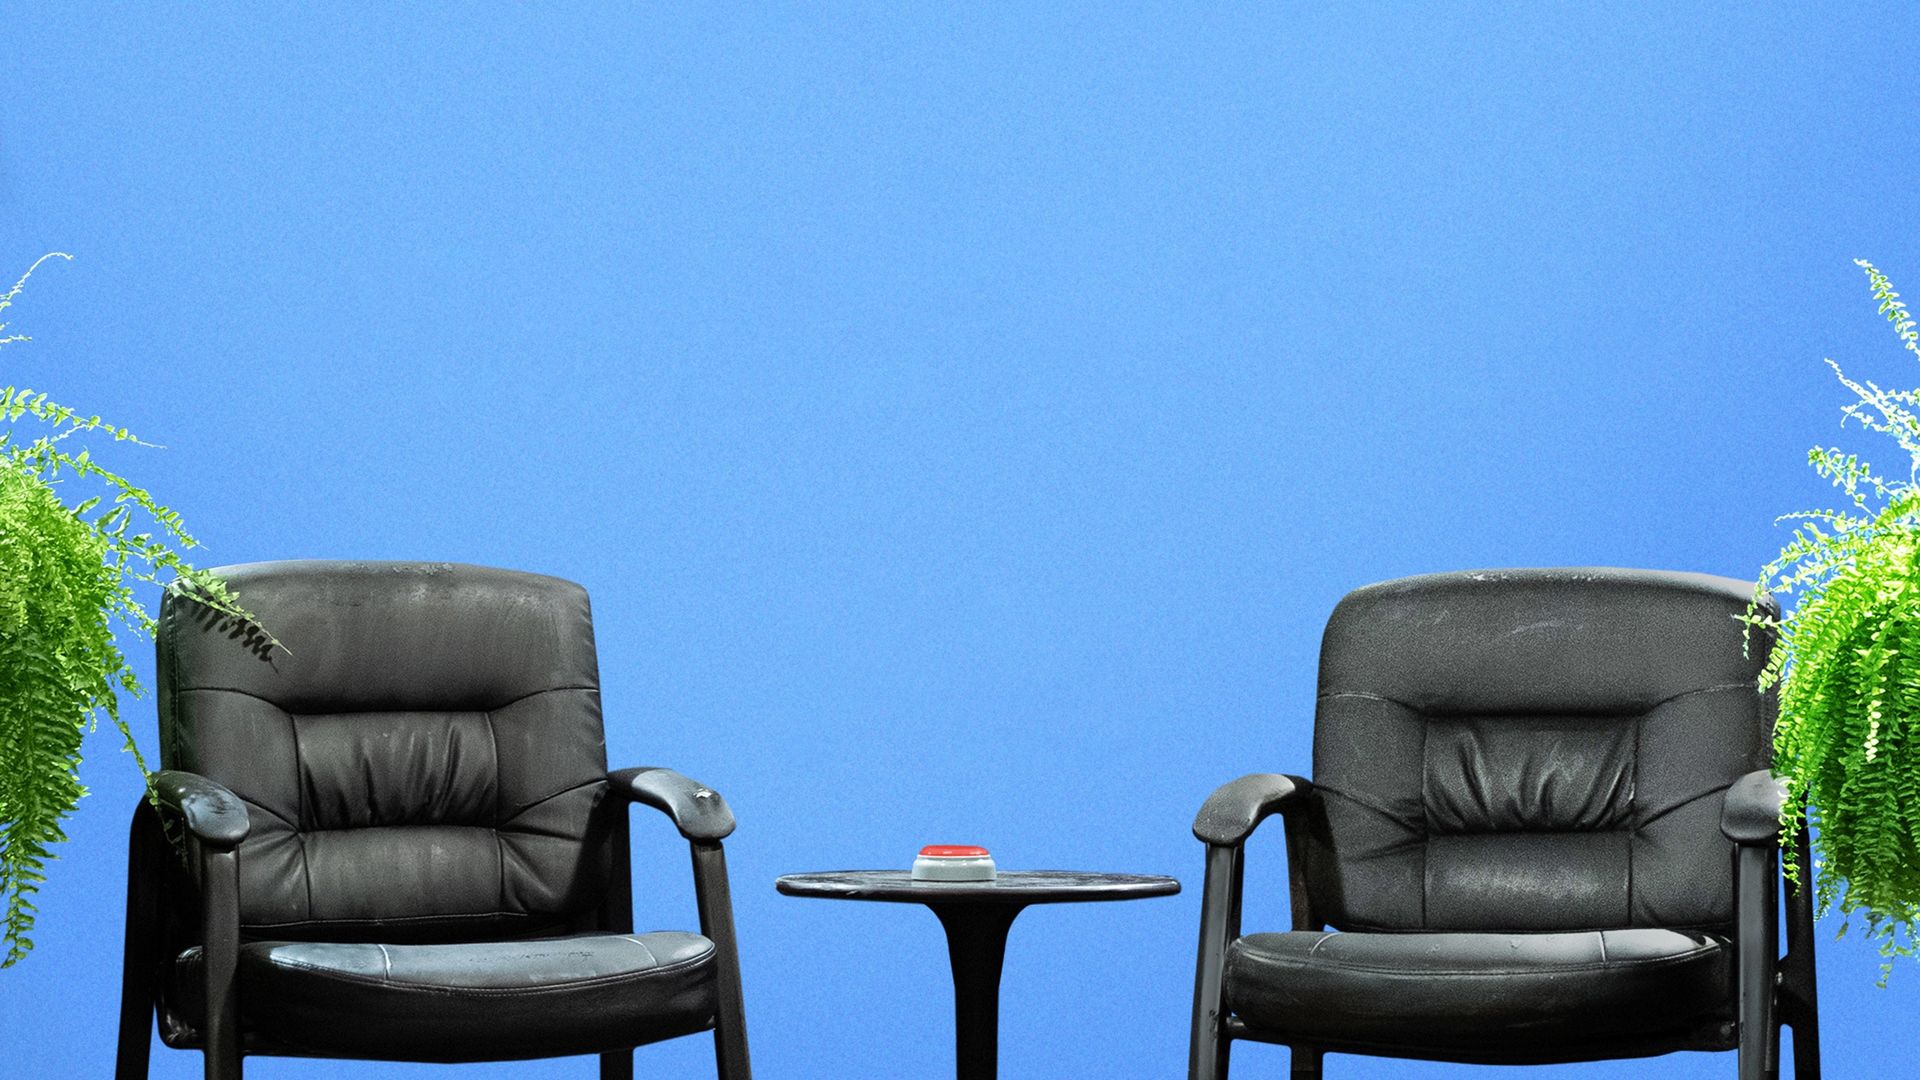 Between Two Ferns: The Movie Backdrop